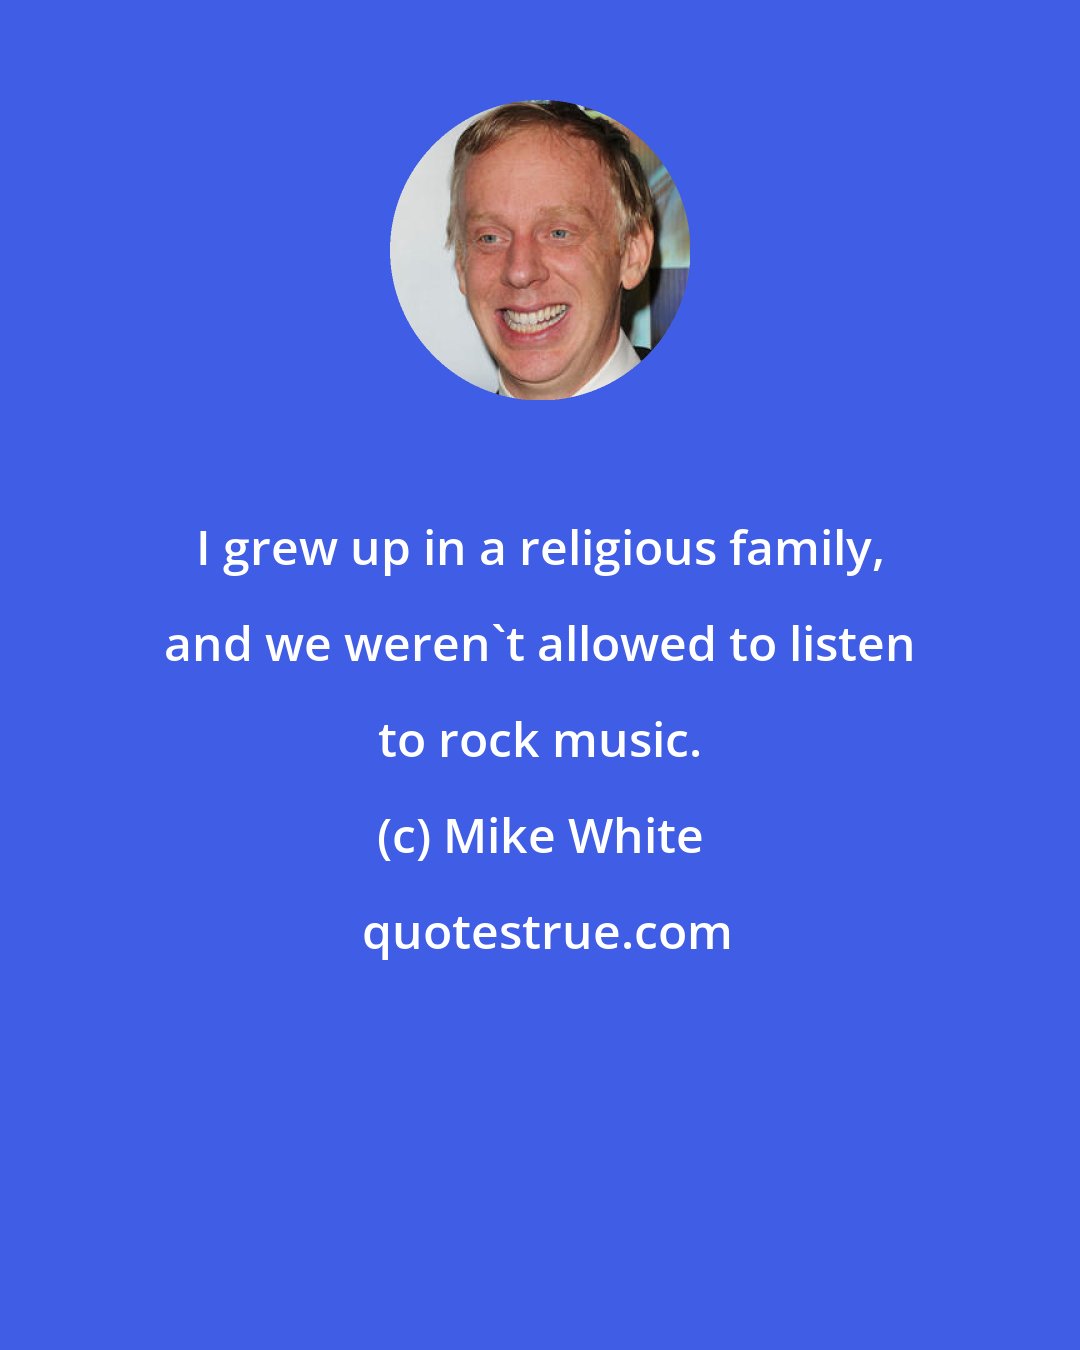 Mike White: I grew up in a religious family, and we weren't allowed to listen to rock music.